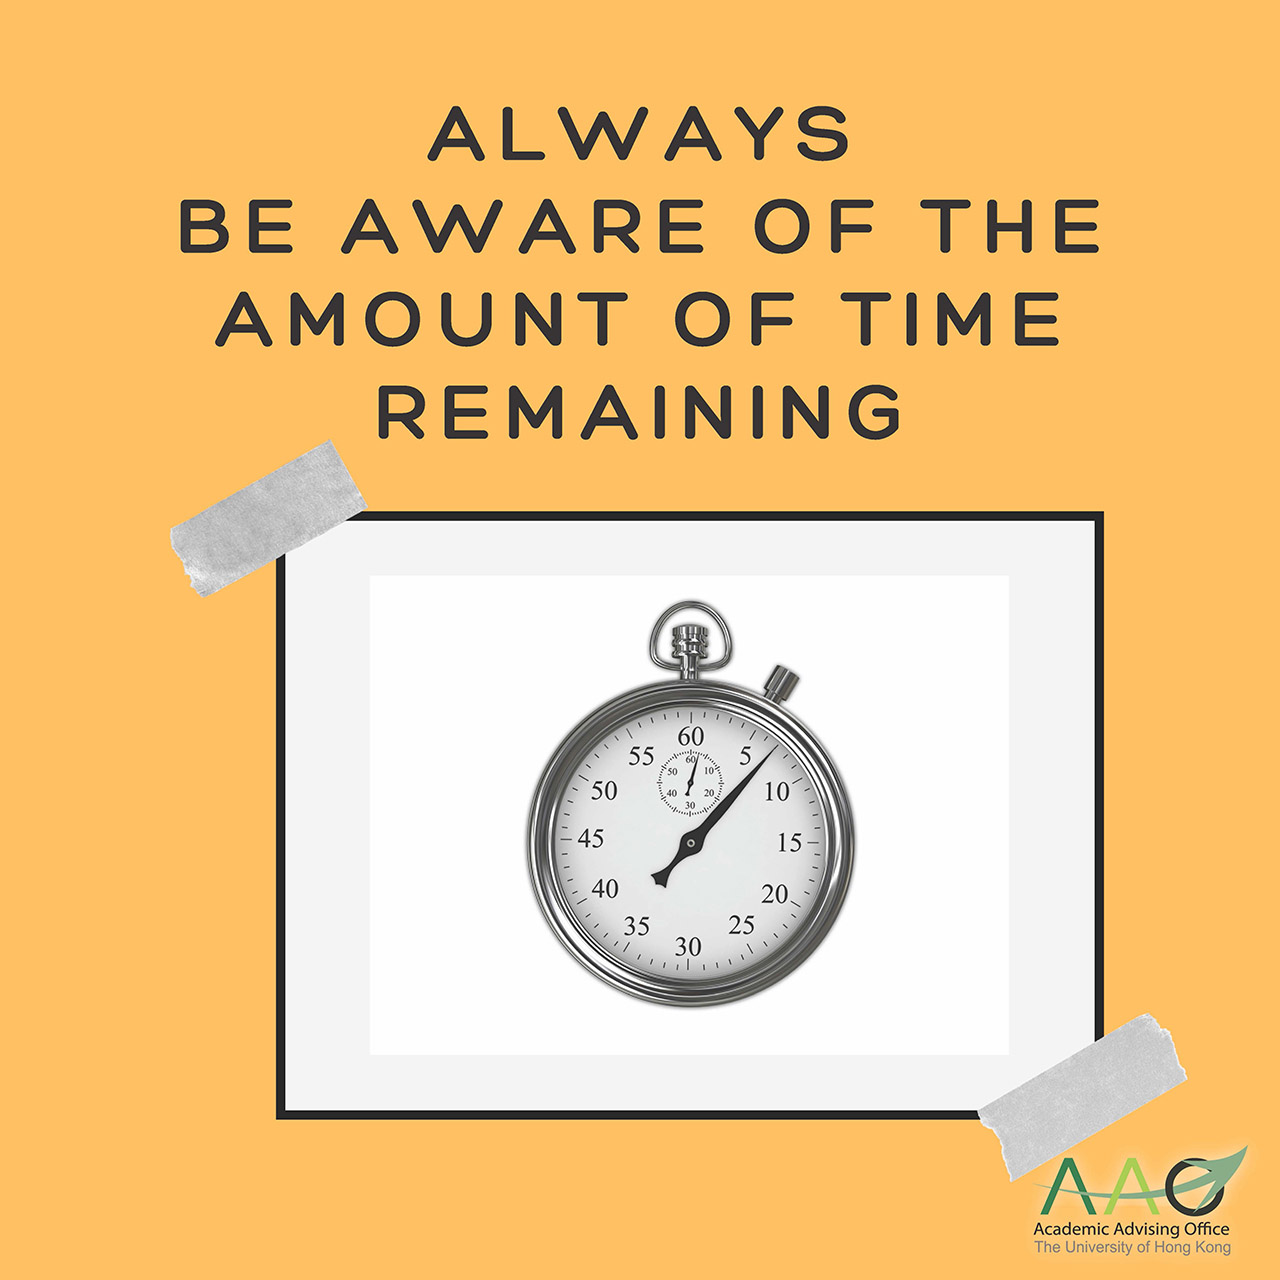 Always be aware of the amount of time remaining.